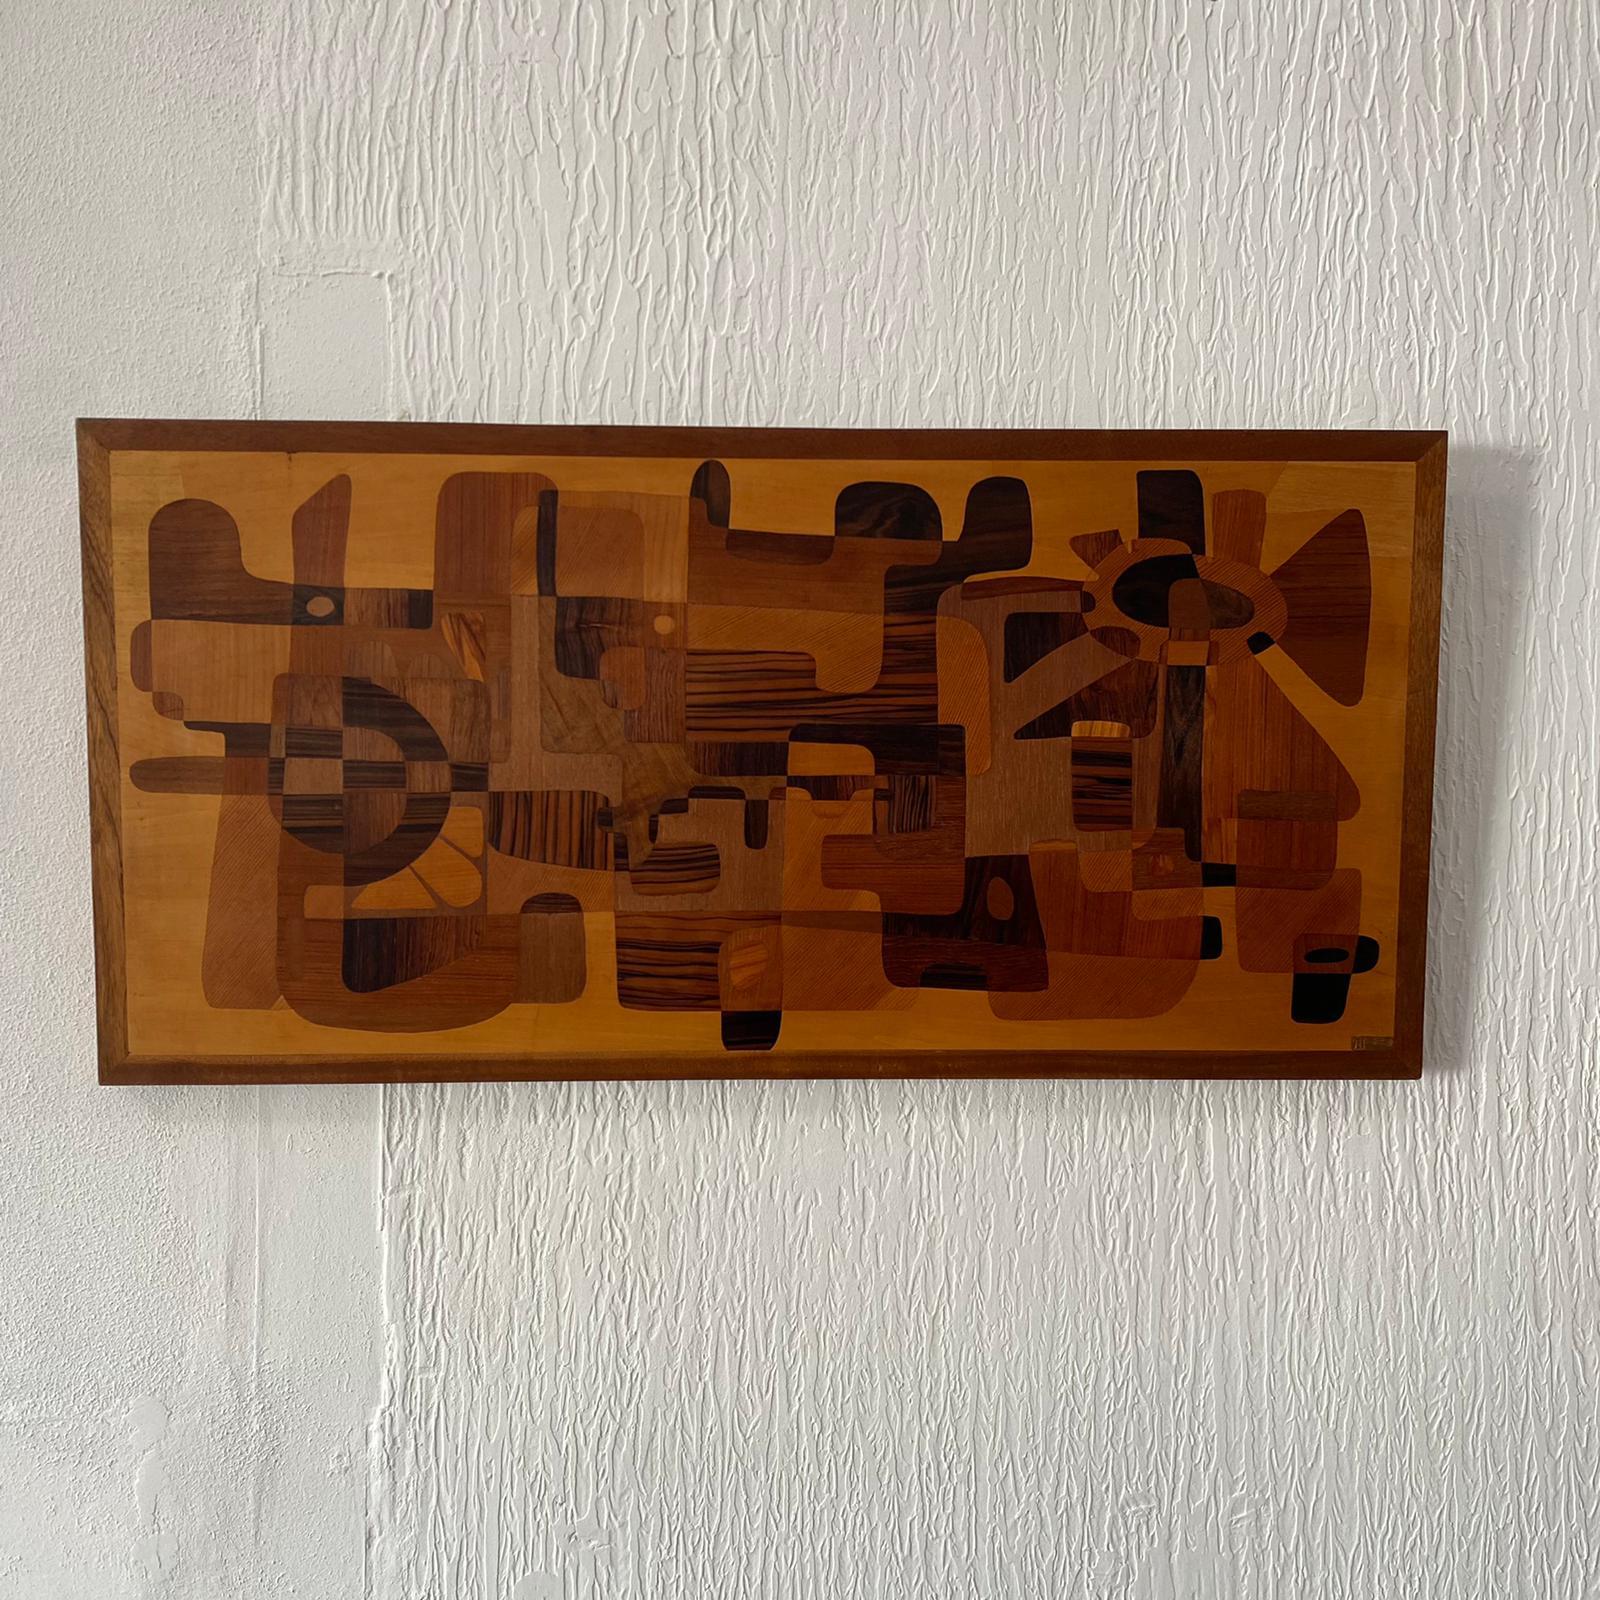 Large Marquetry Geometric Panel Wall Art, Mid Century Modern In Good Condition For Sale In Sherborne, GB